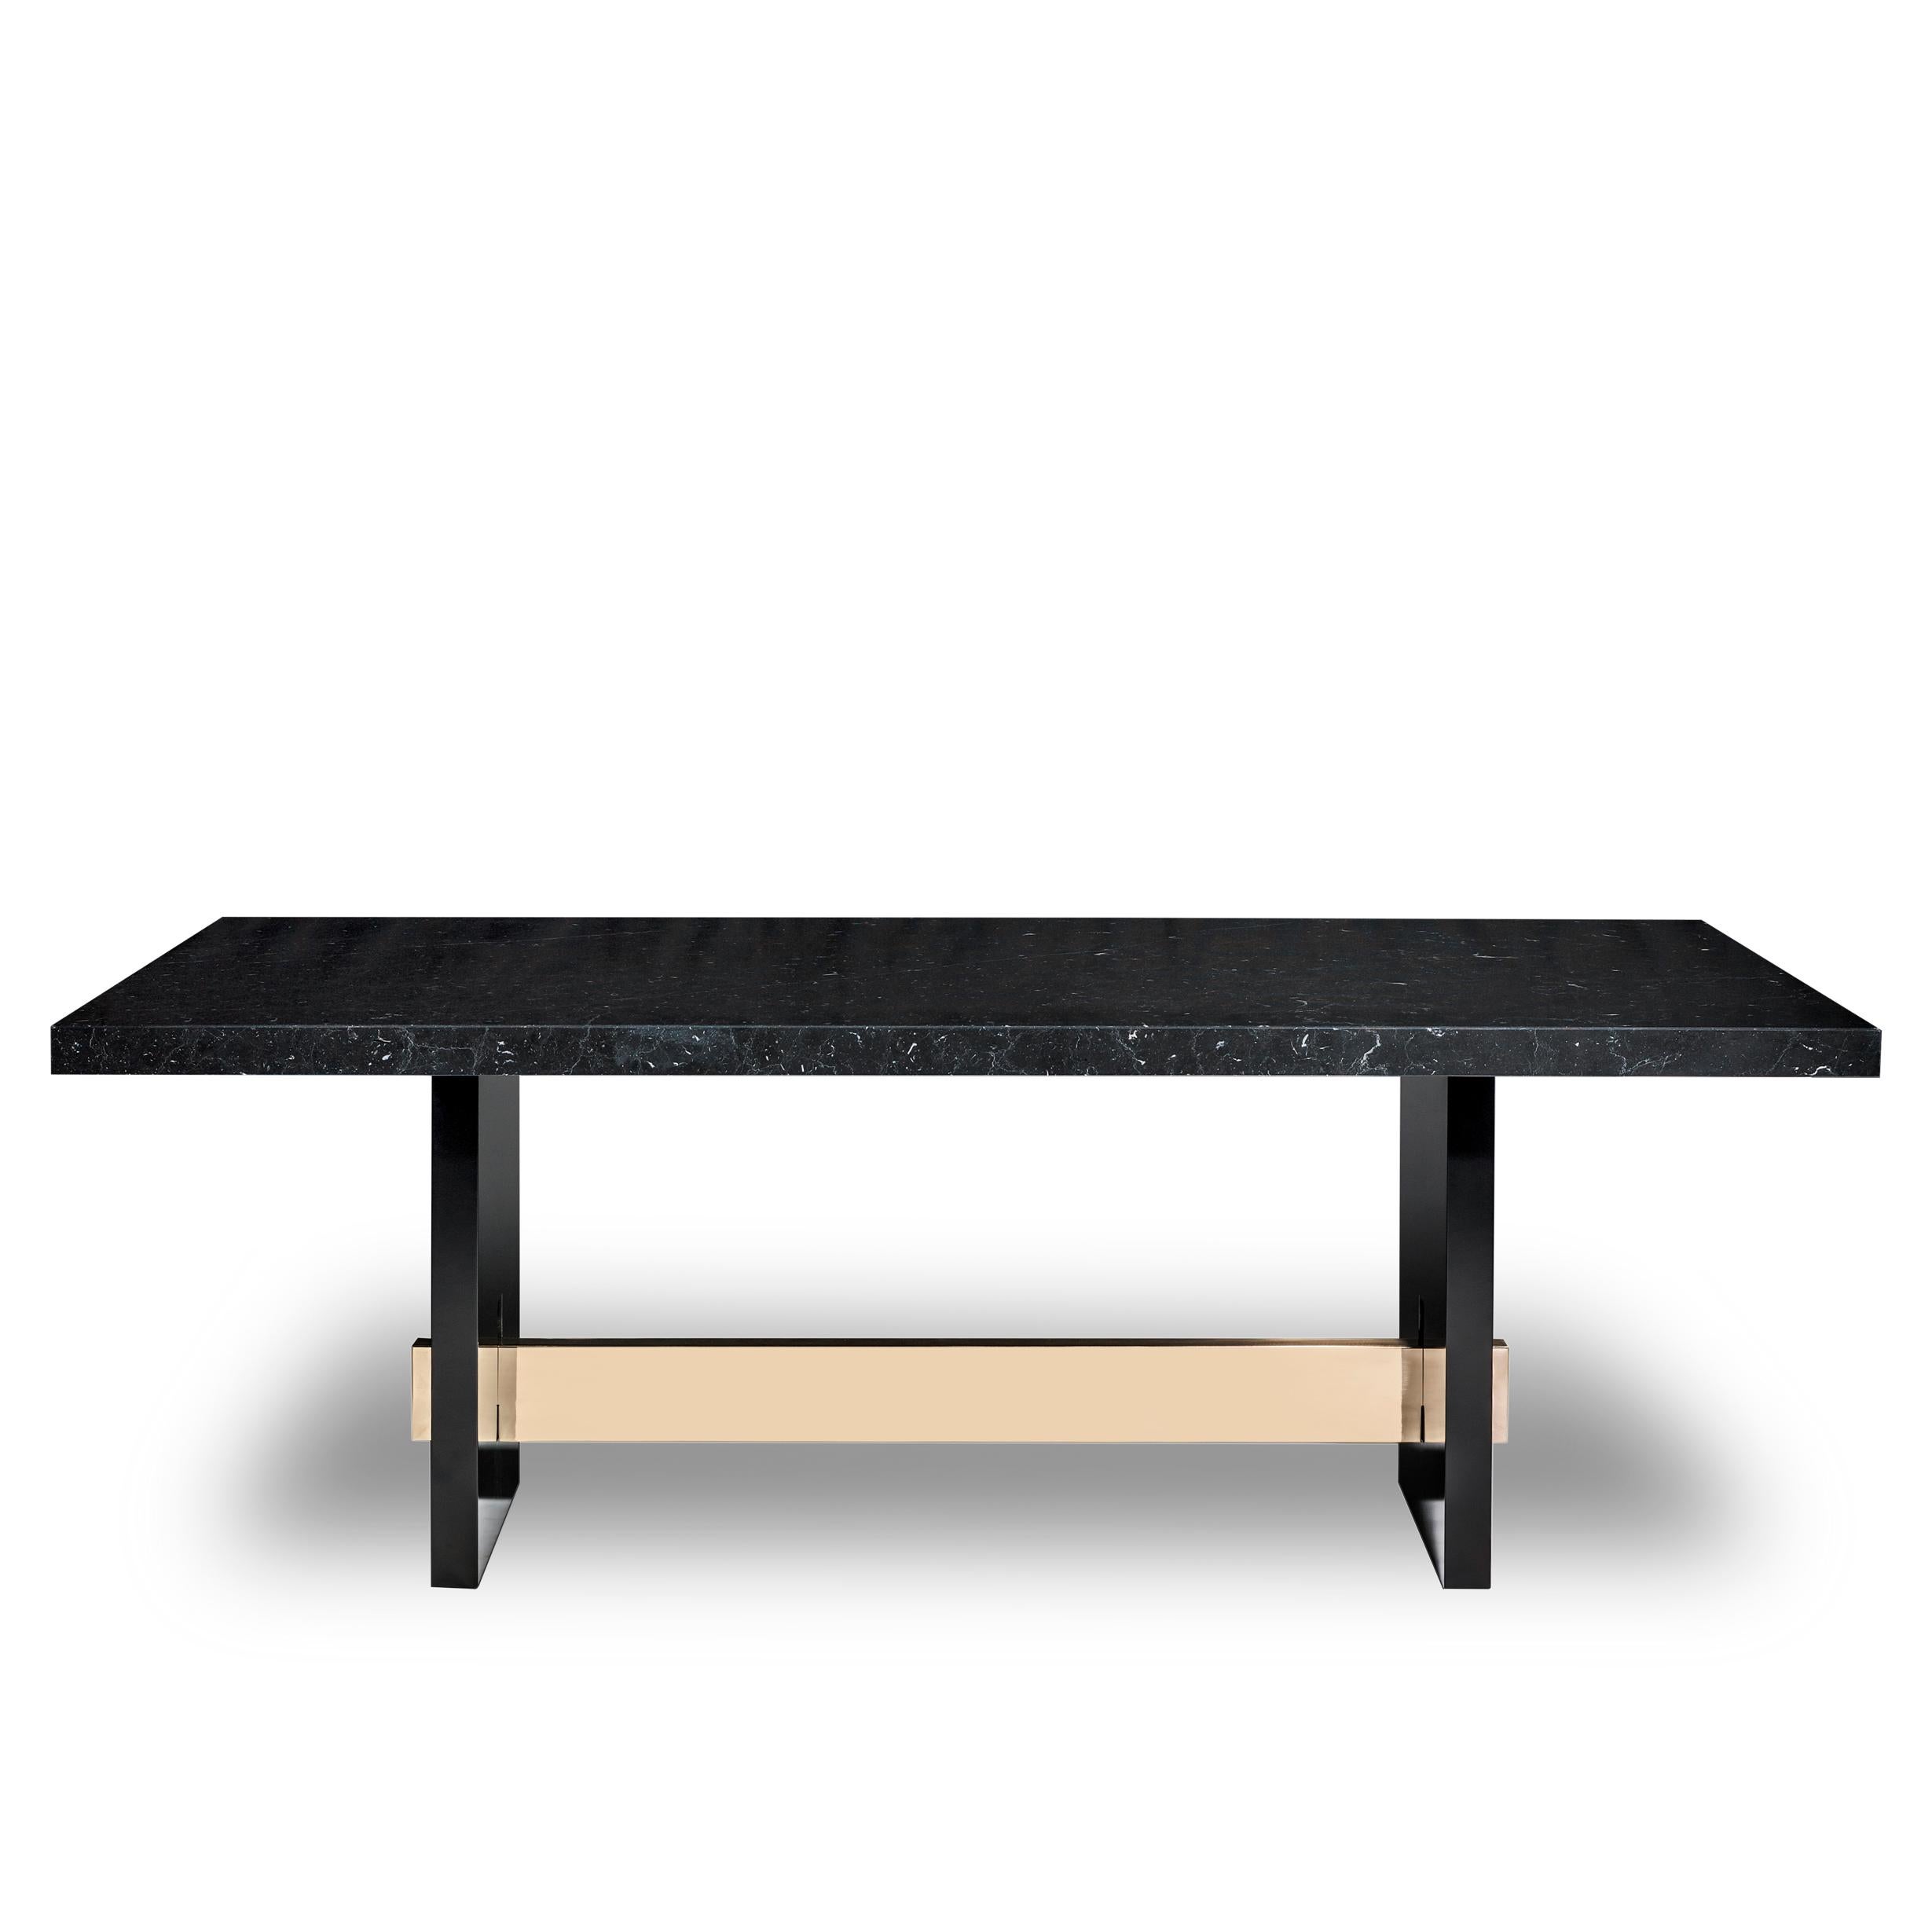 Geometry Marble Table, Nero Marquina Top, Handcrafted in Portugal by Duistt

Geometry marble table combines the luxury of the nero marquina marble with the strong geometric lines of the table legs. It is made with a high gloss lacquered wood and